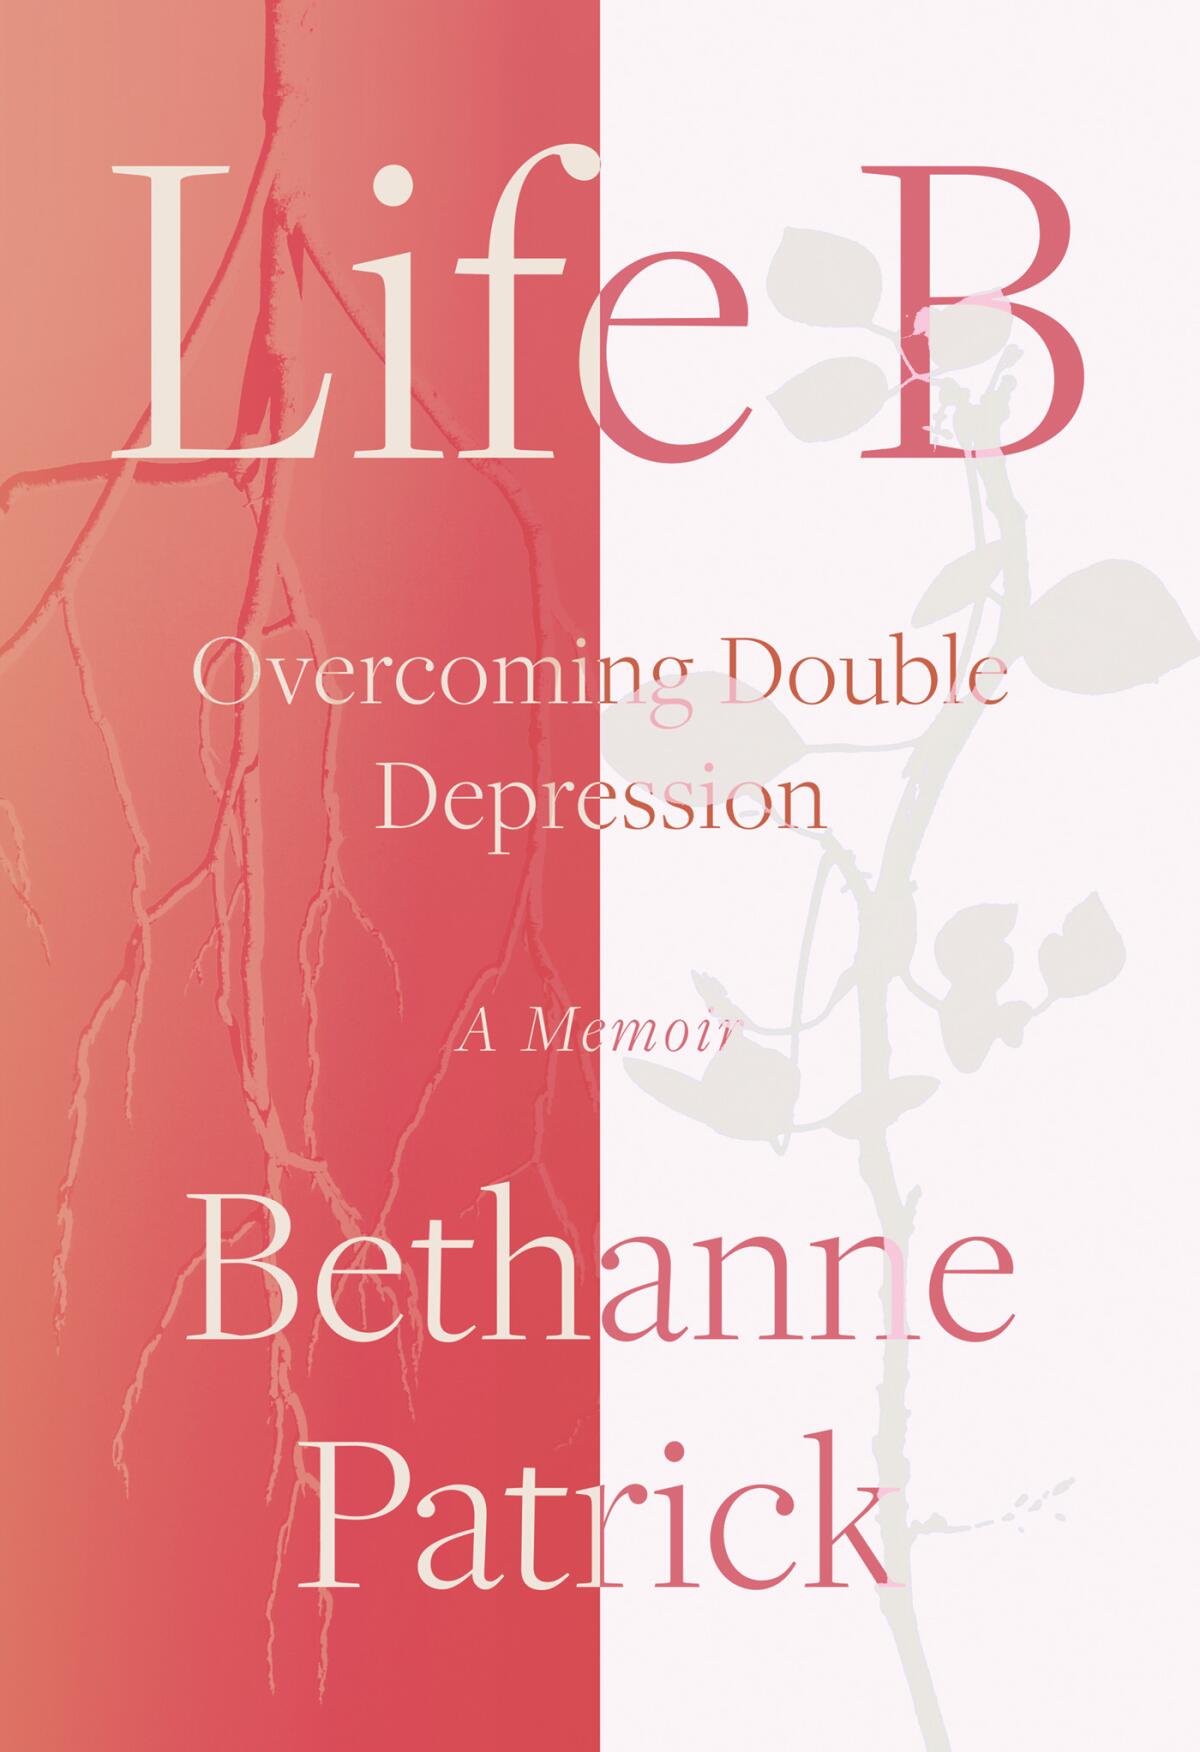 'Life B: Overcoming Double Depression,' by Bethanne Patrick